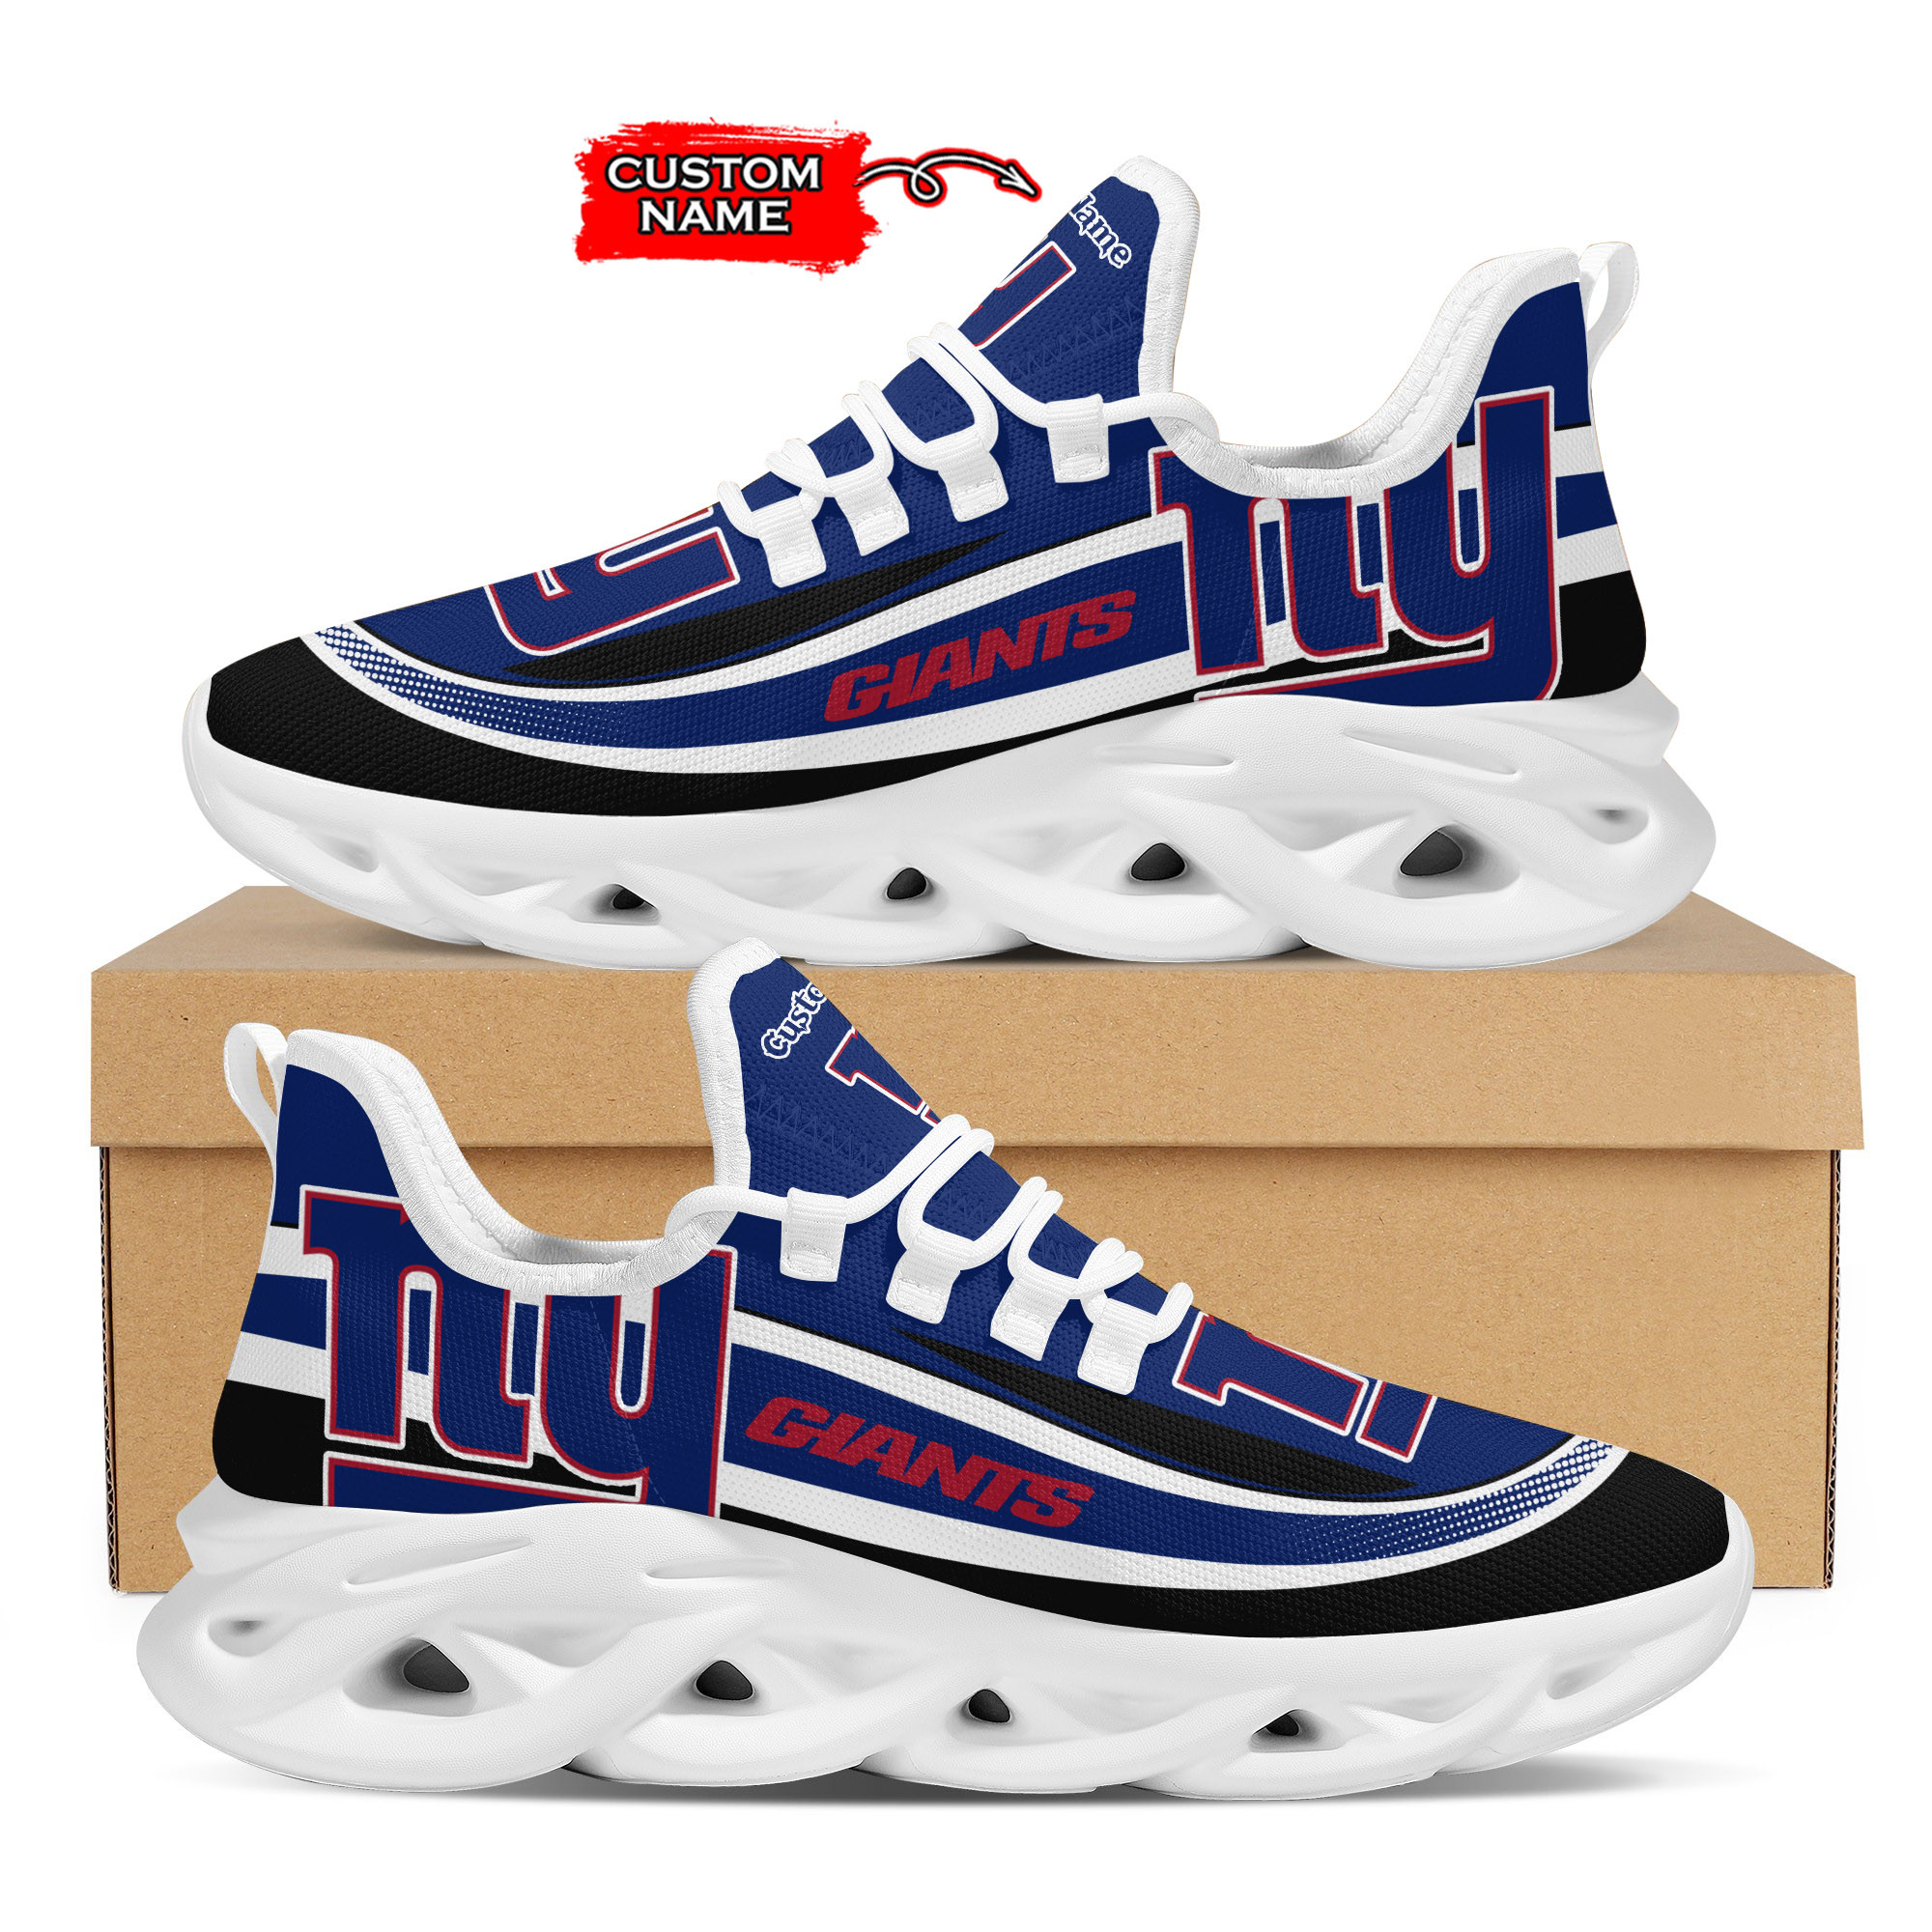 New York Giants Nfl Custom Name Clunky Max Soul Shoes Sneakers For Mens Womens Personalized Gifts – Hothot